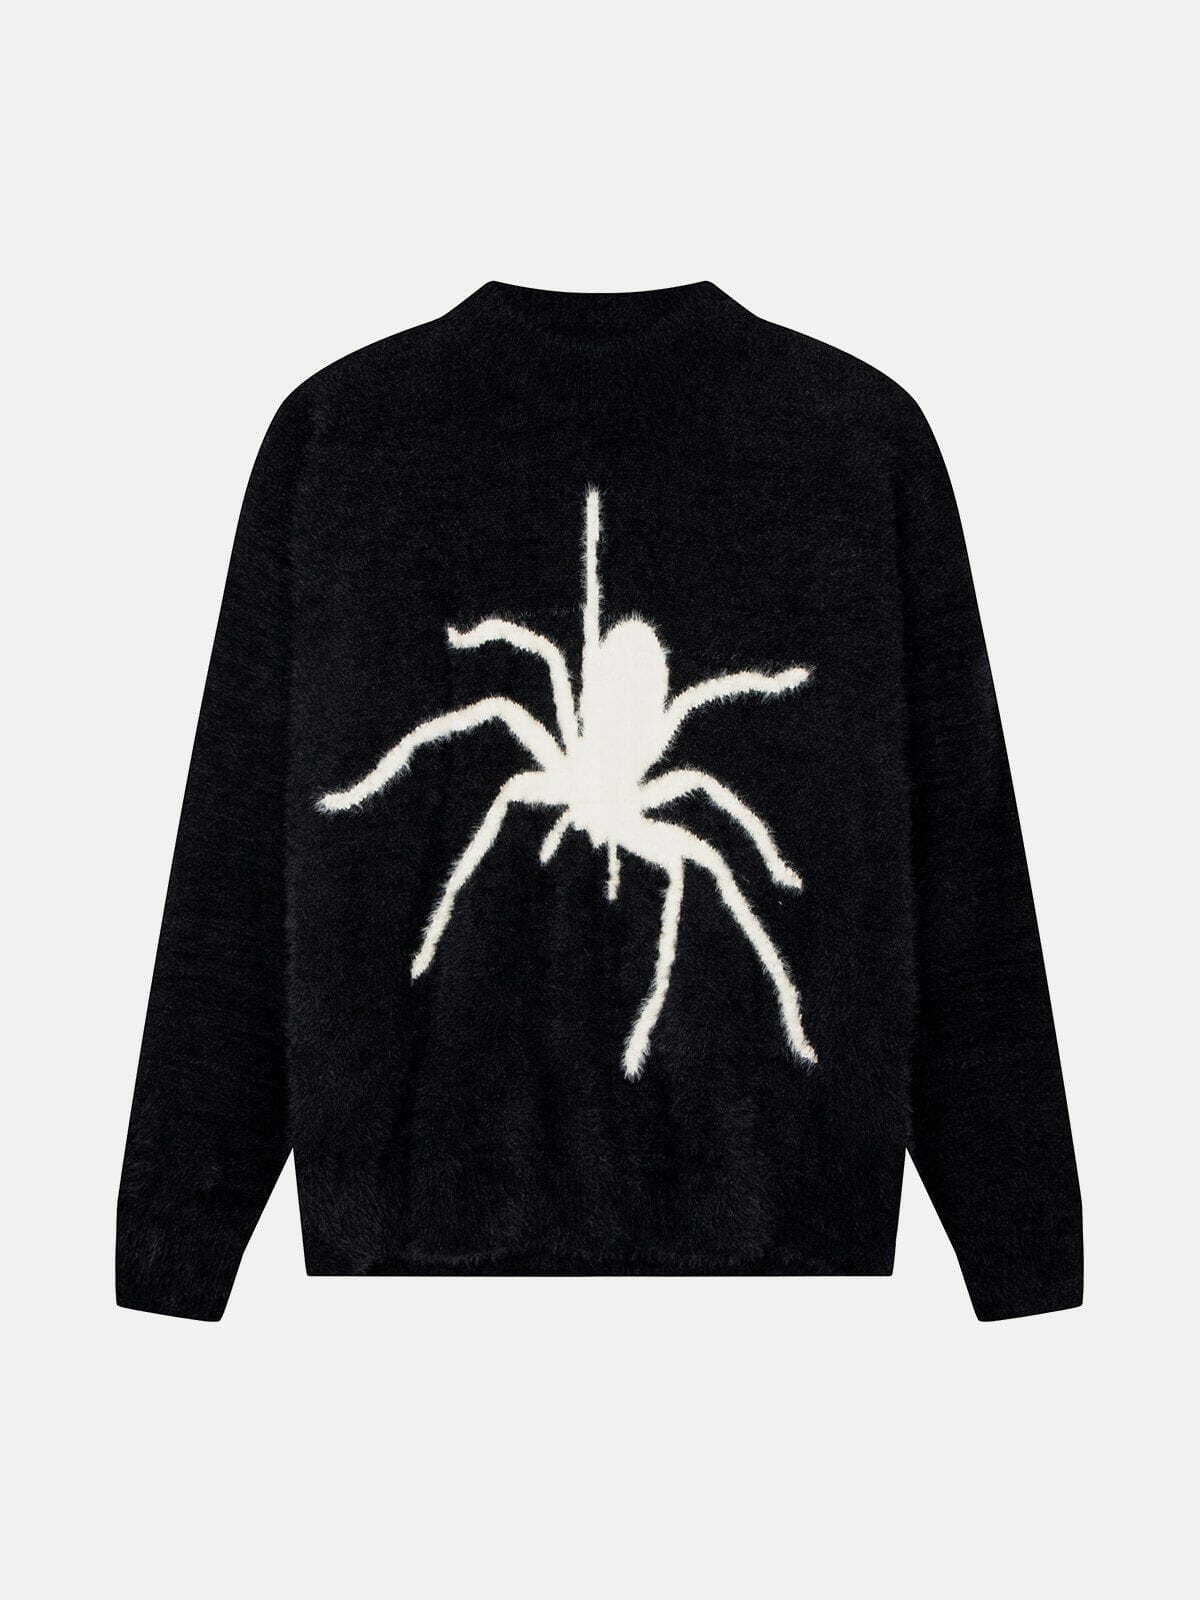 spider knit mohair sweater edgy & vibrant streetwear 3957